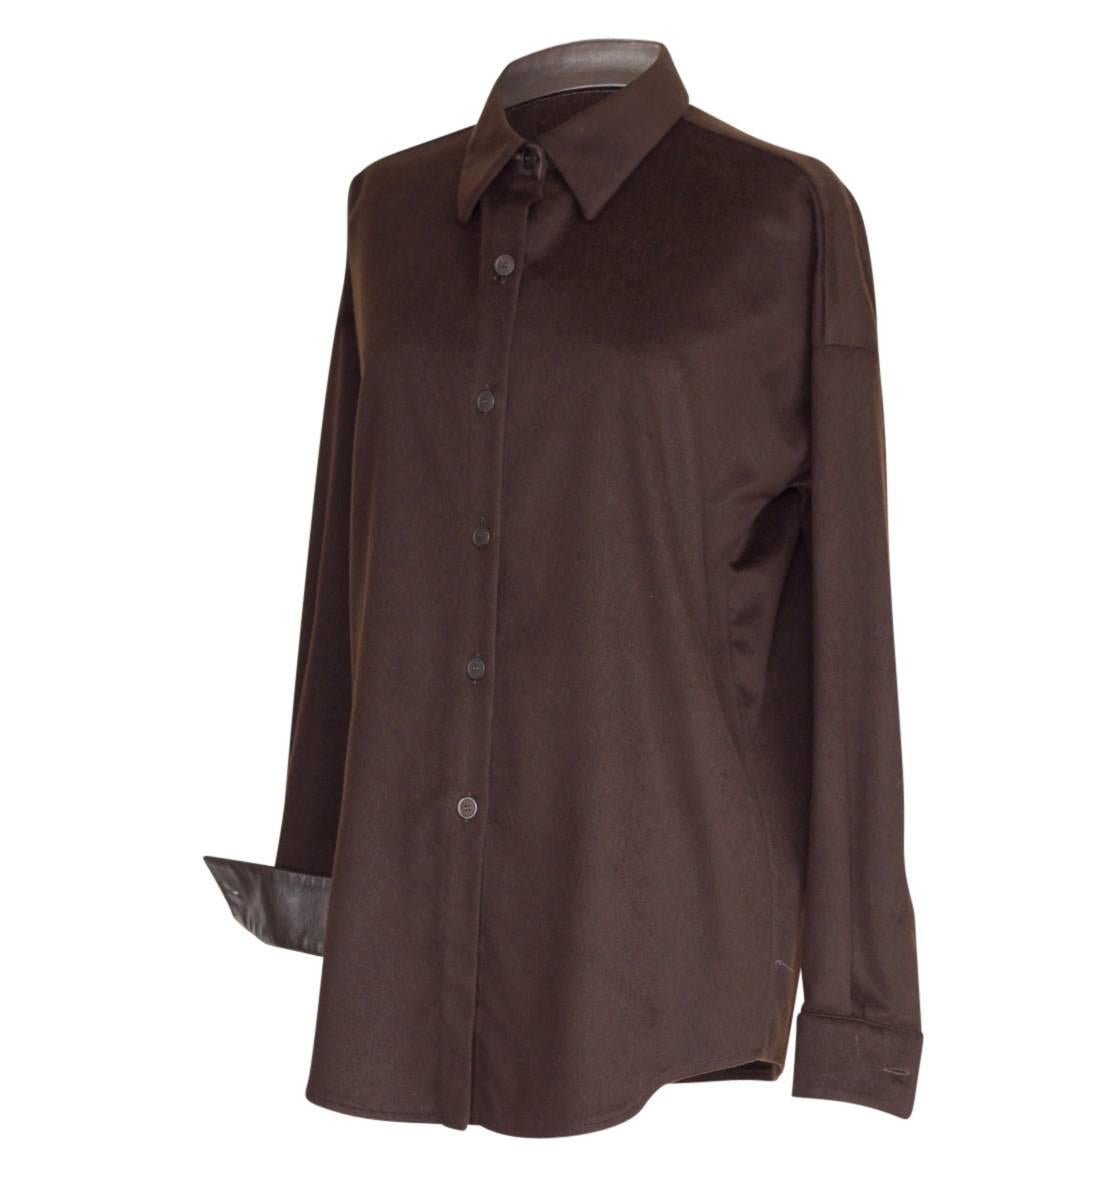 Black Agnona Shirt Cashmere and Leather Details Rich Chocolate Brown 46